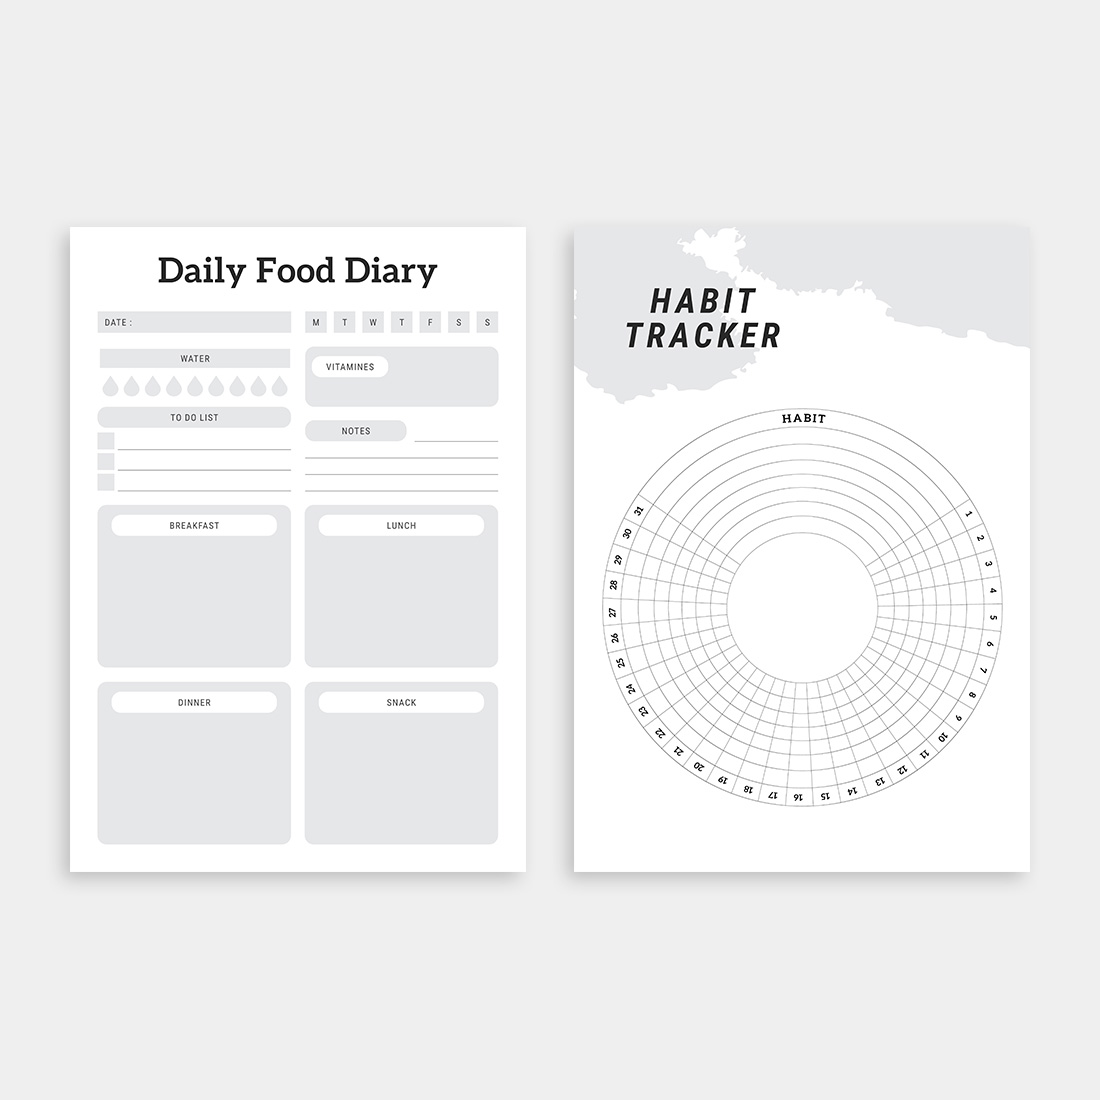 Daily Habit Tracker created by MNT-creator.